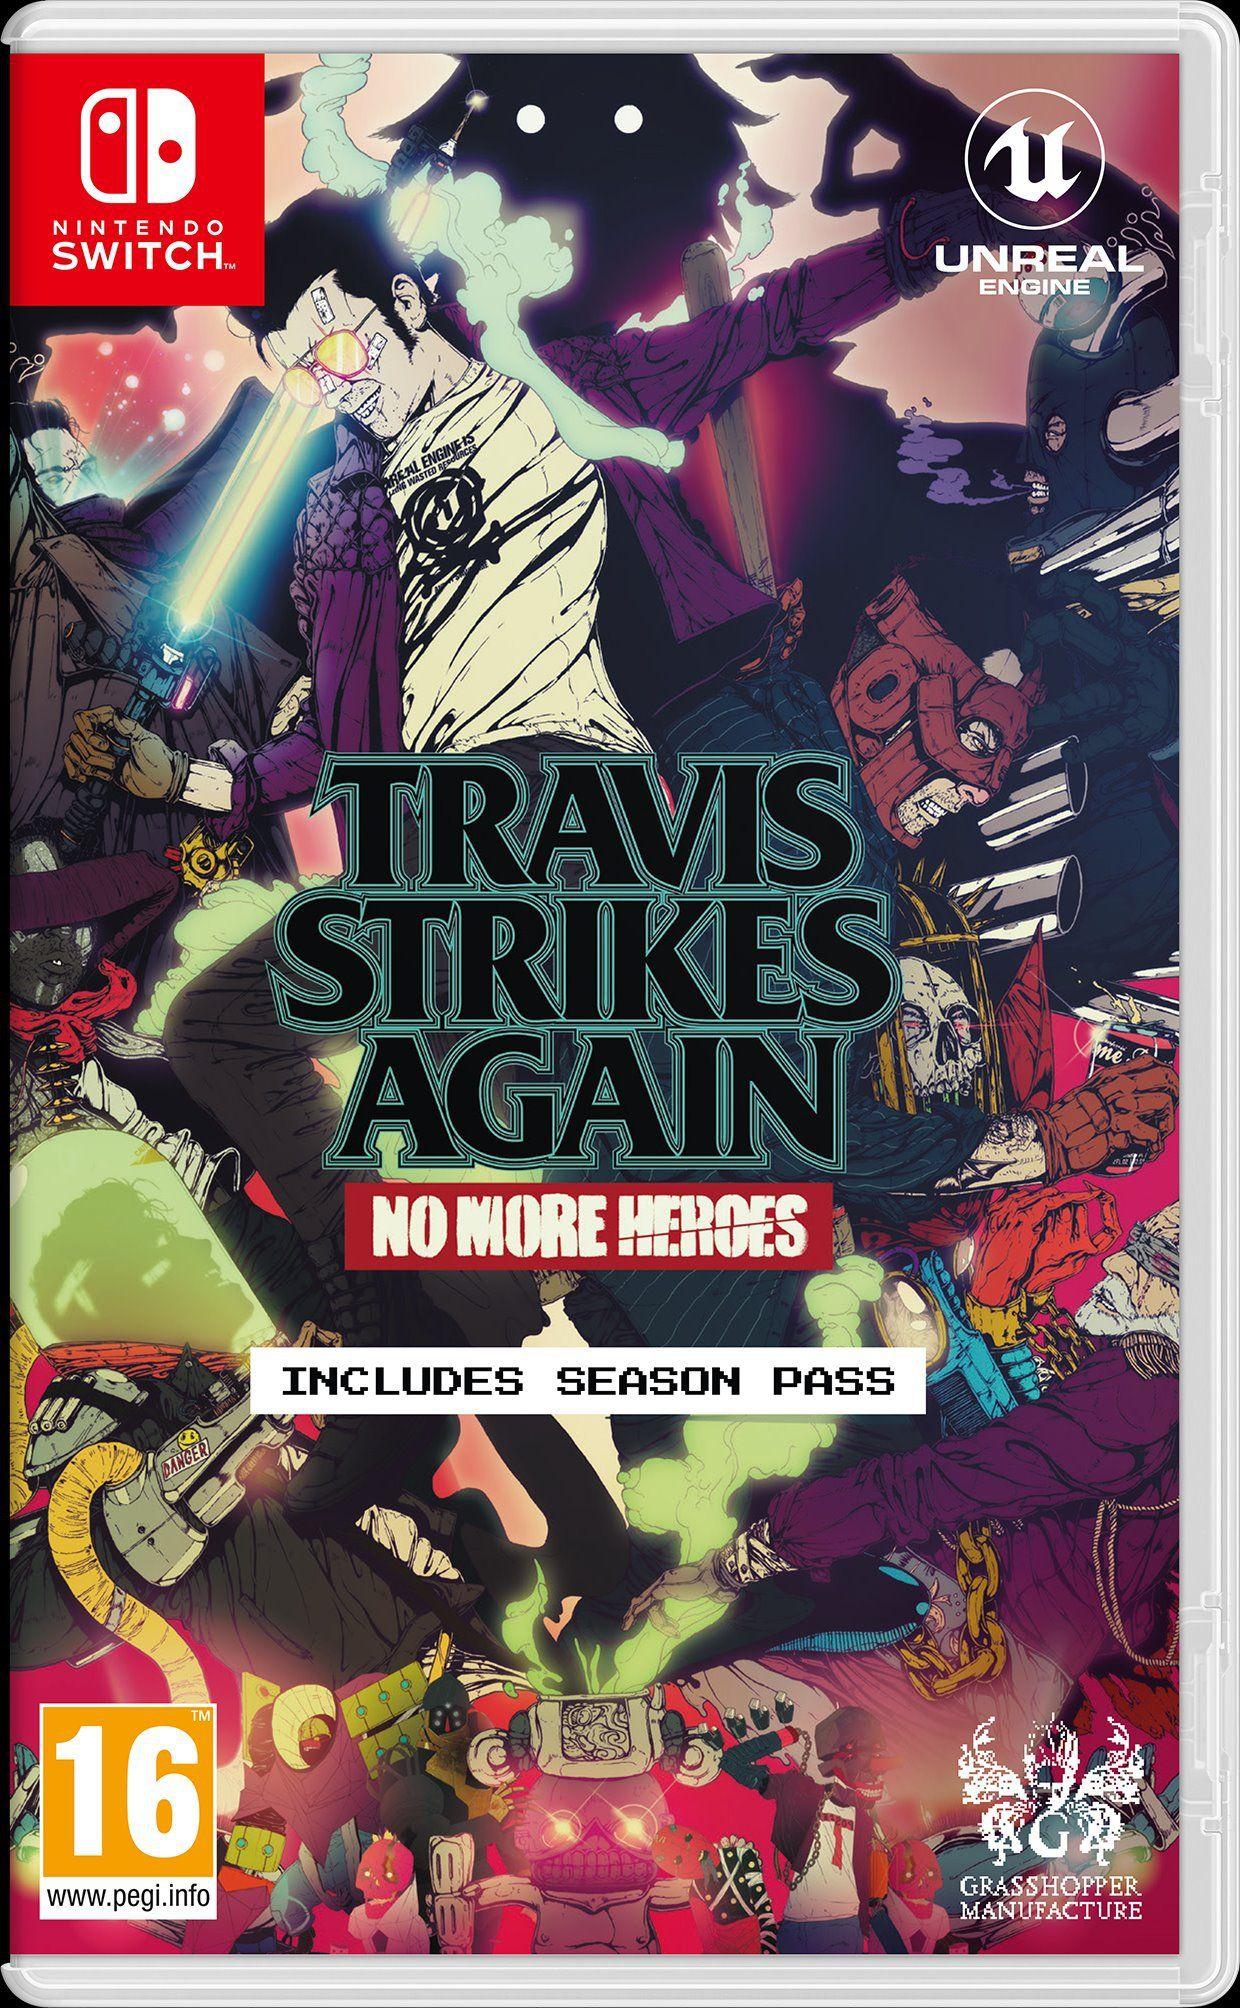 Travis Strikes Again, No More Heroes' box art is a thing of beauty